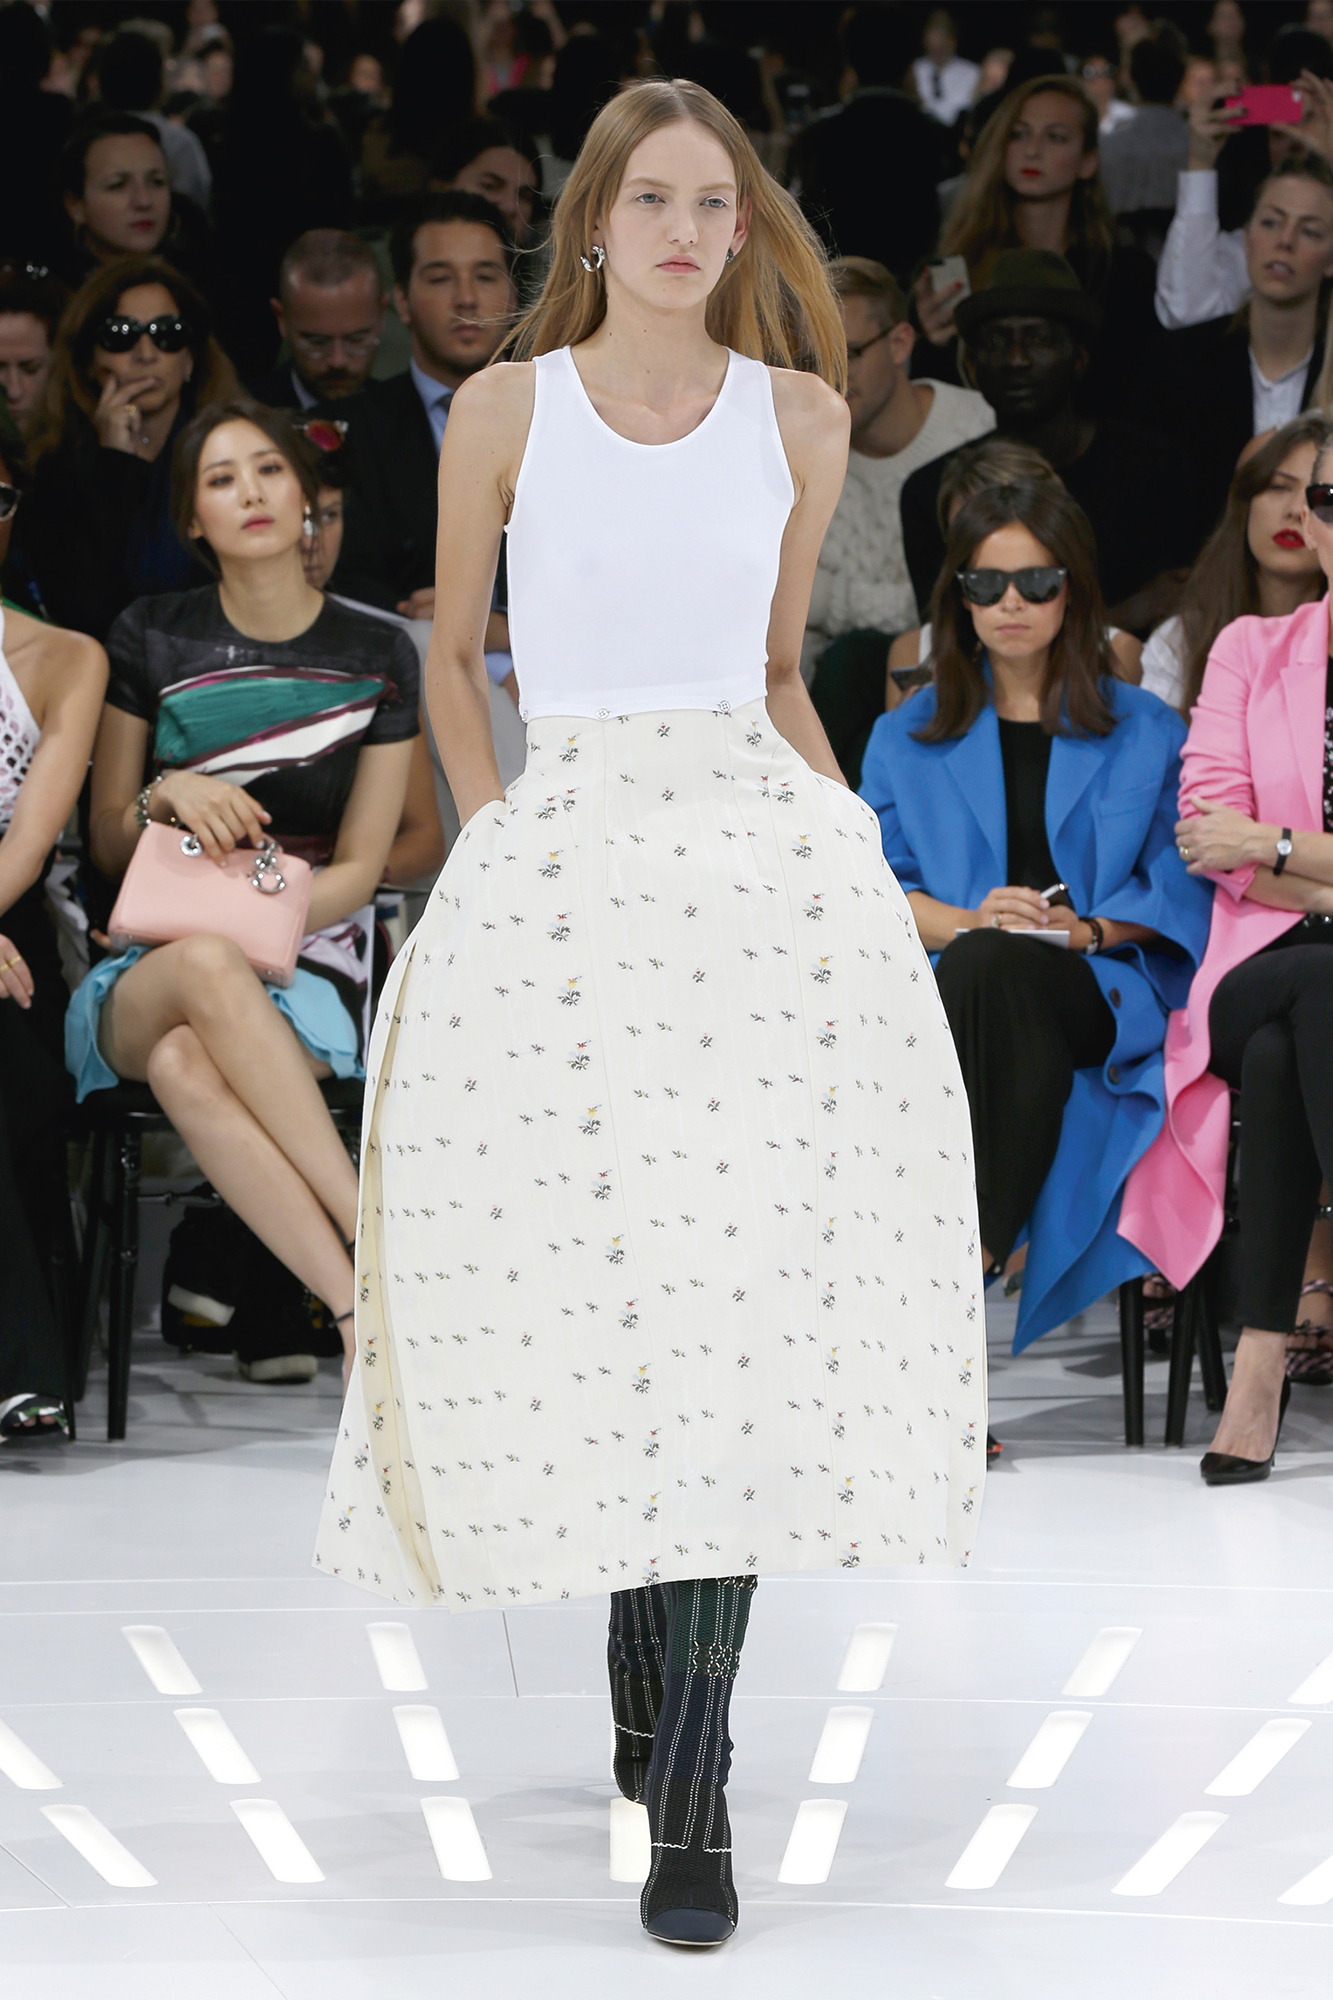 Christian Dior Haute Couture Spring-Summer Ready To Wear Dresses & Accessories Collection 2015-16 (10)